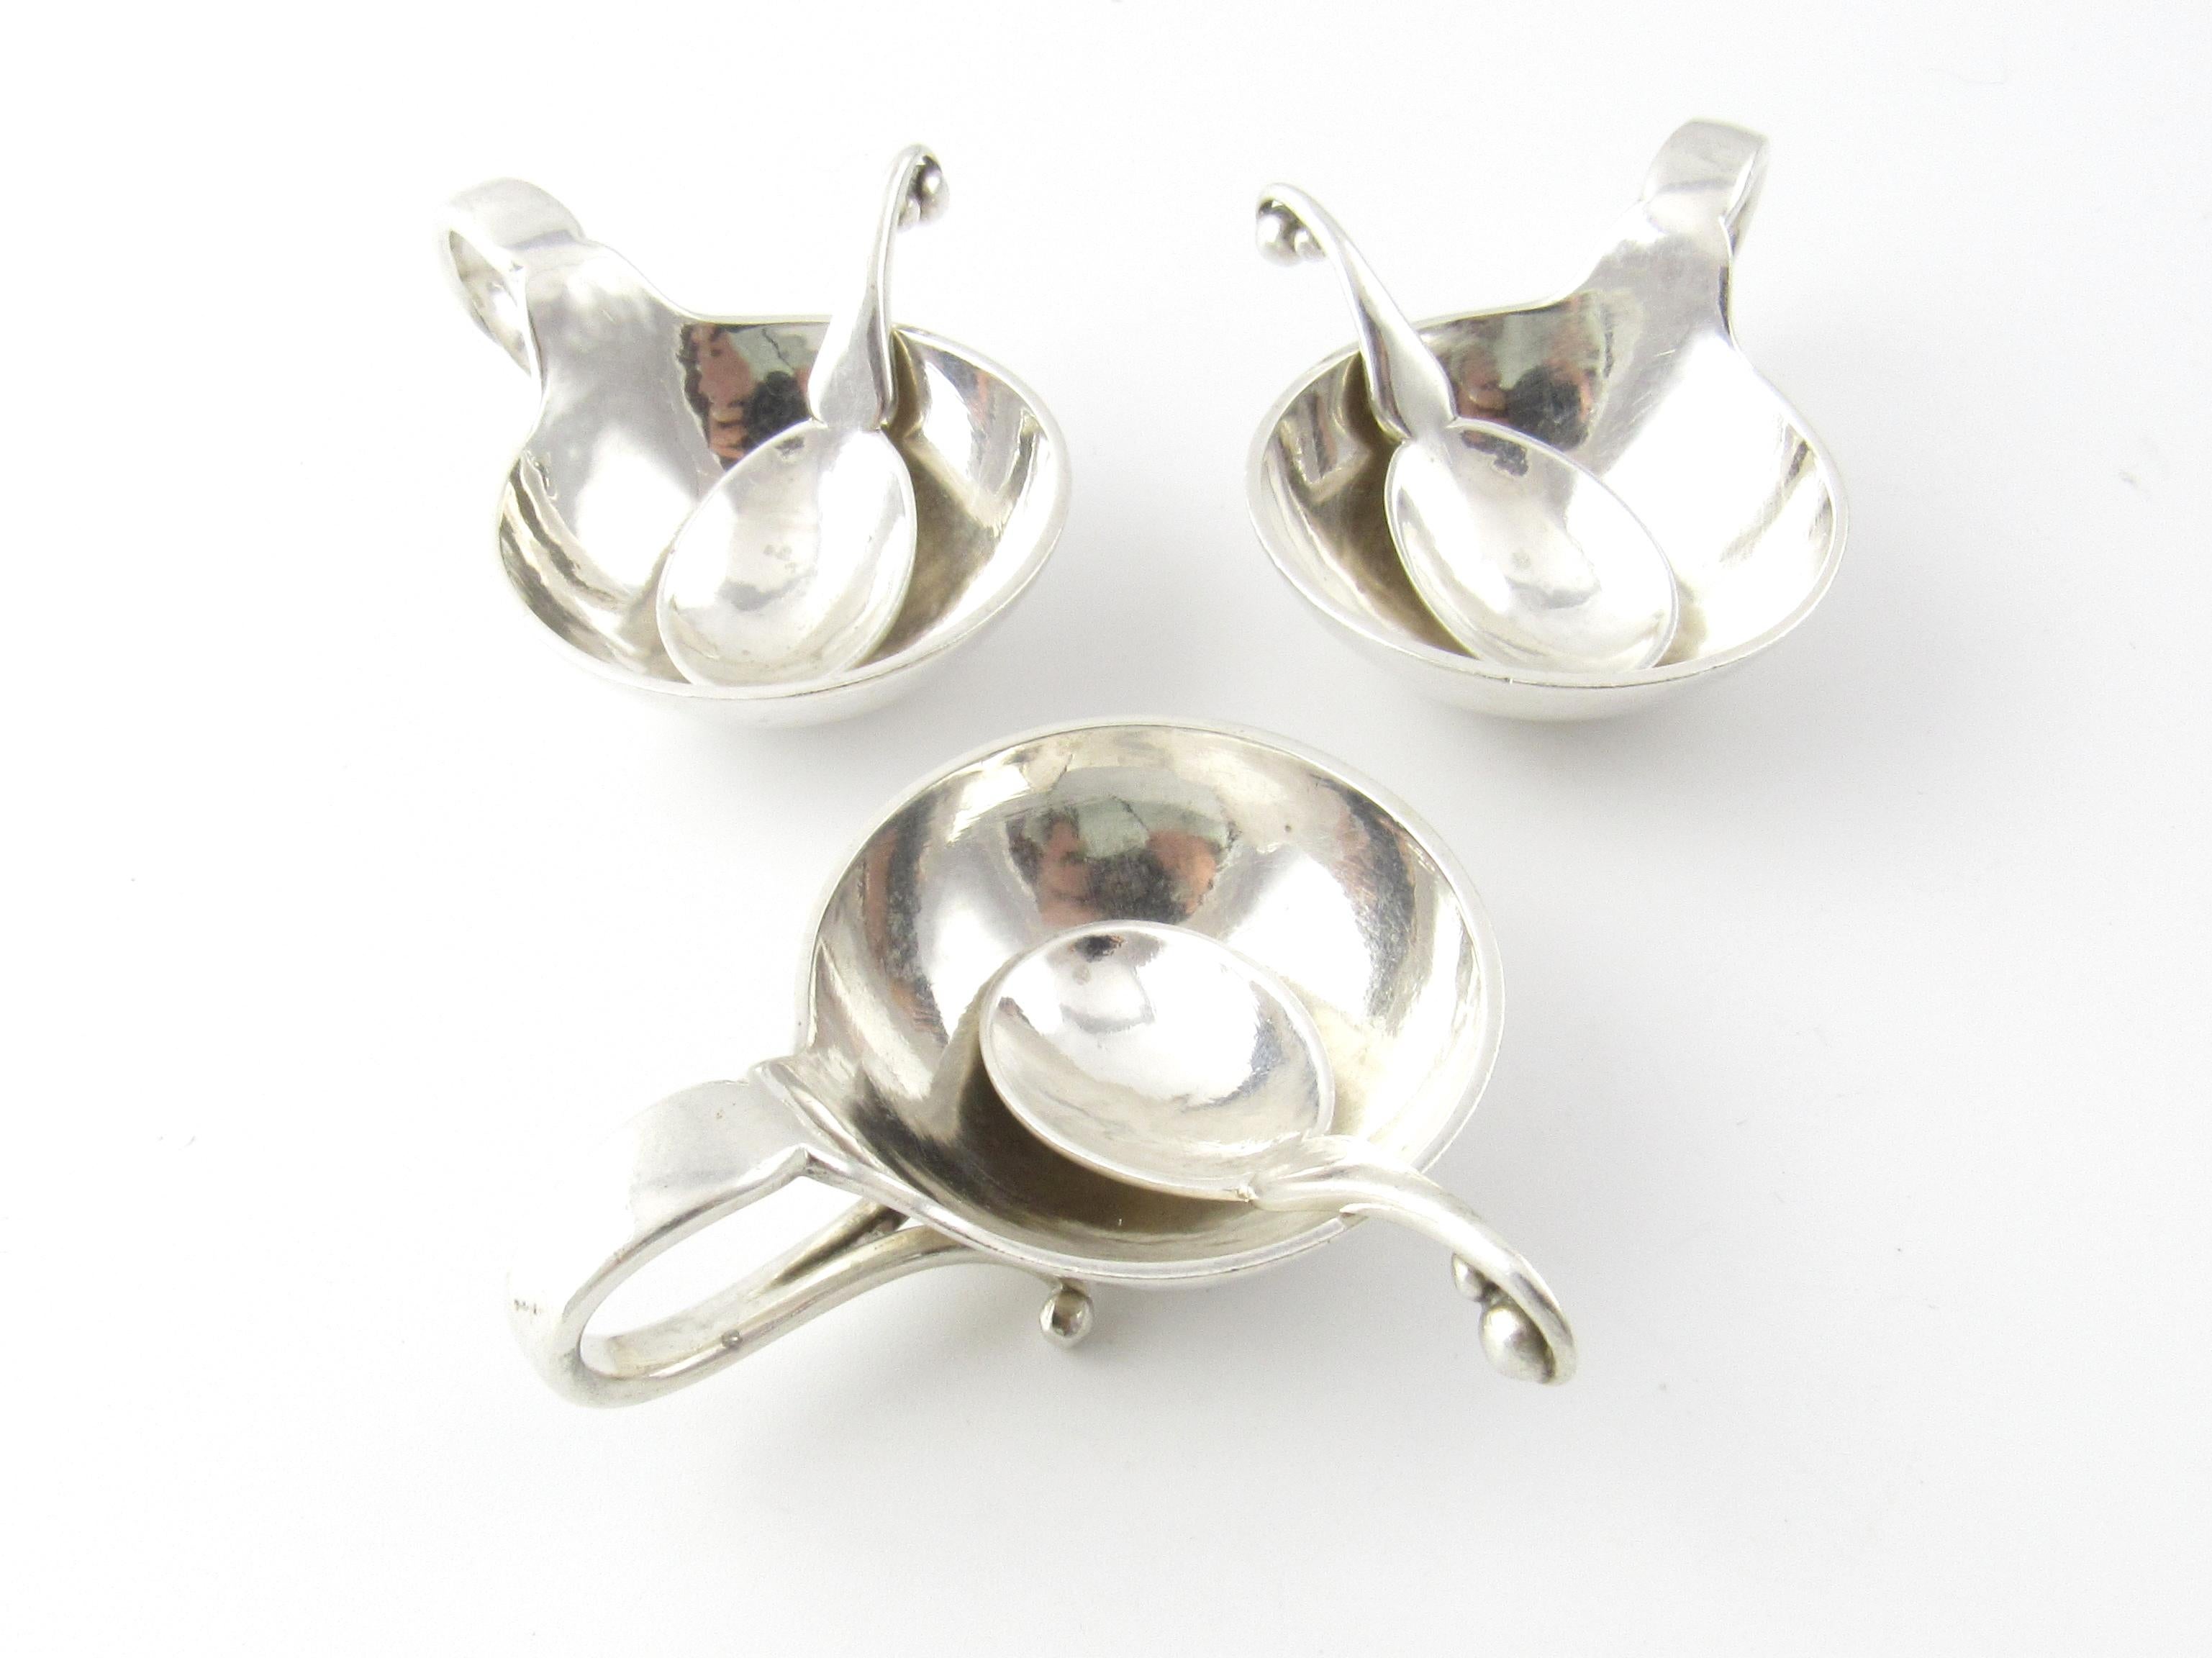 3 George Jensen Sterling Silver Salt Cellars and Matching Spoons #110

This is a beautiful set of three sterling silver salt cellars with hammered surface and matching spoons by George Jensen.

Measurement: Salt cellars measures 1 and 3/8 inches in